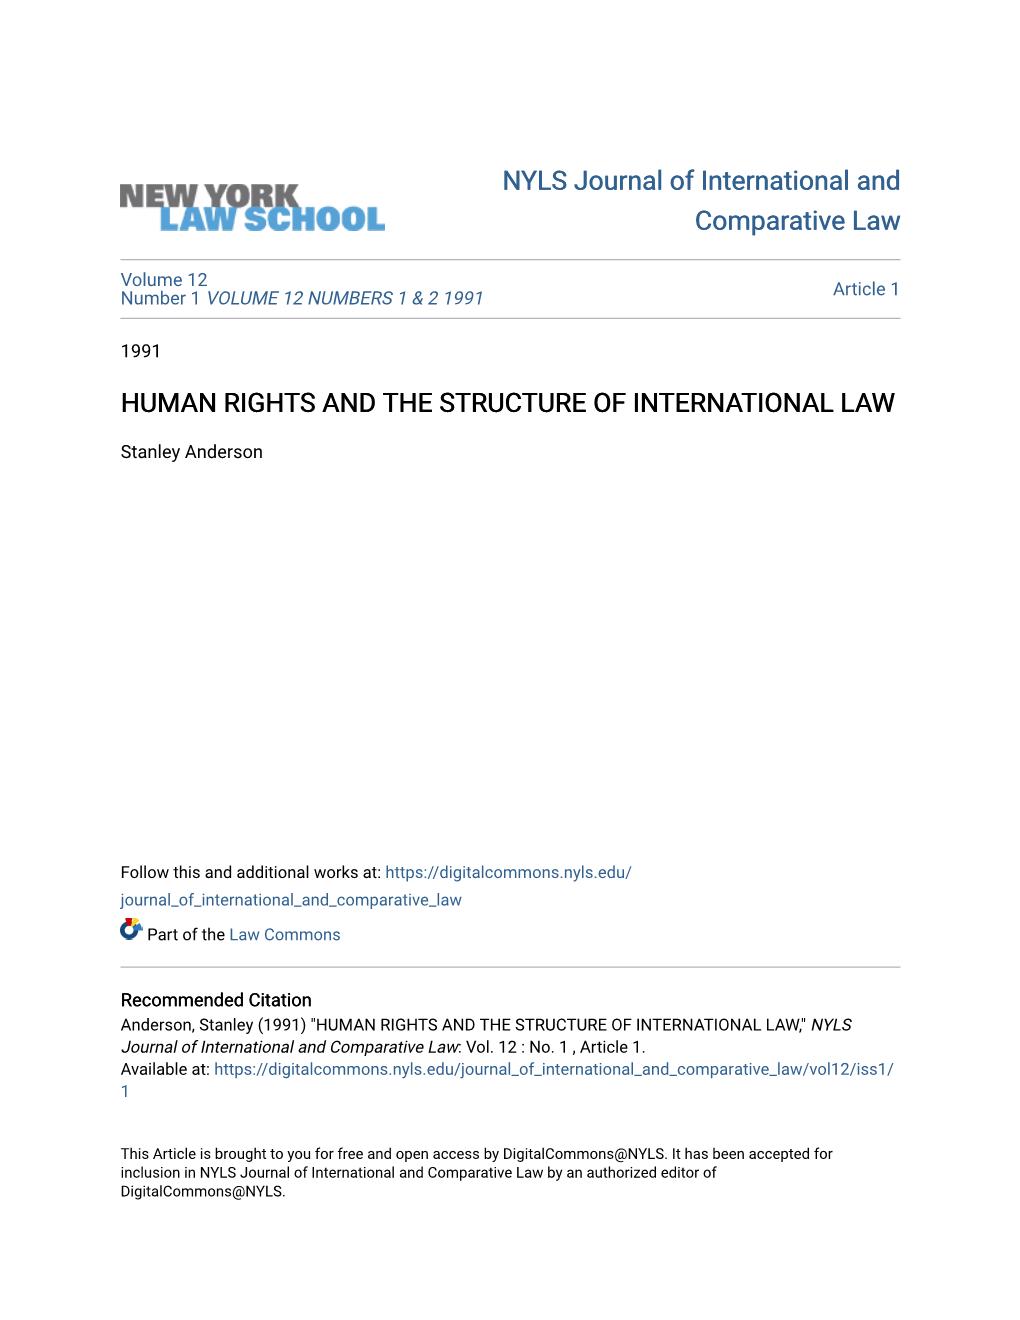 Human Rights and the Structure of International Law